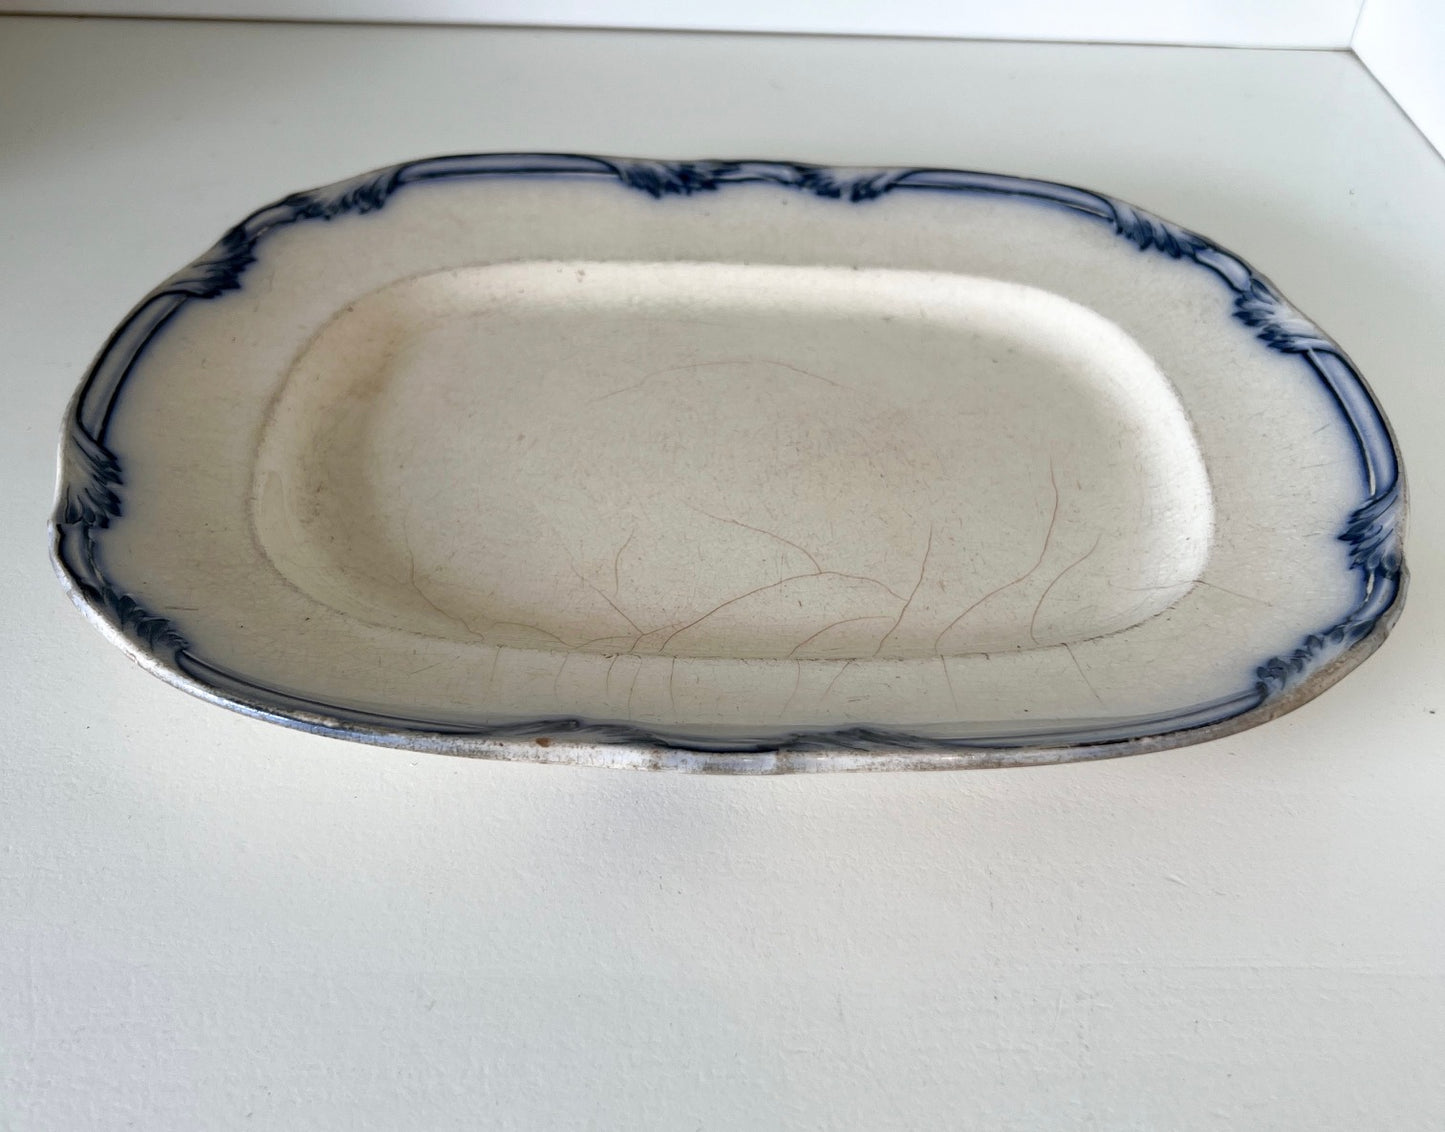 3/4 top view of antique furnival platter